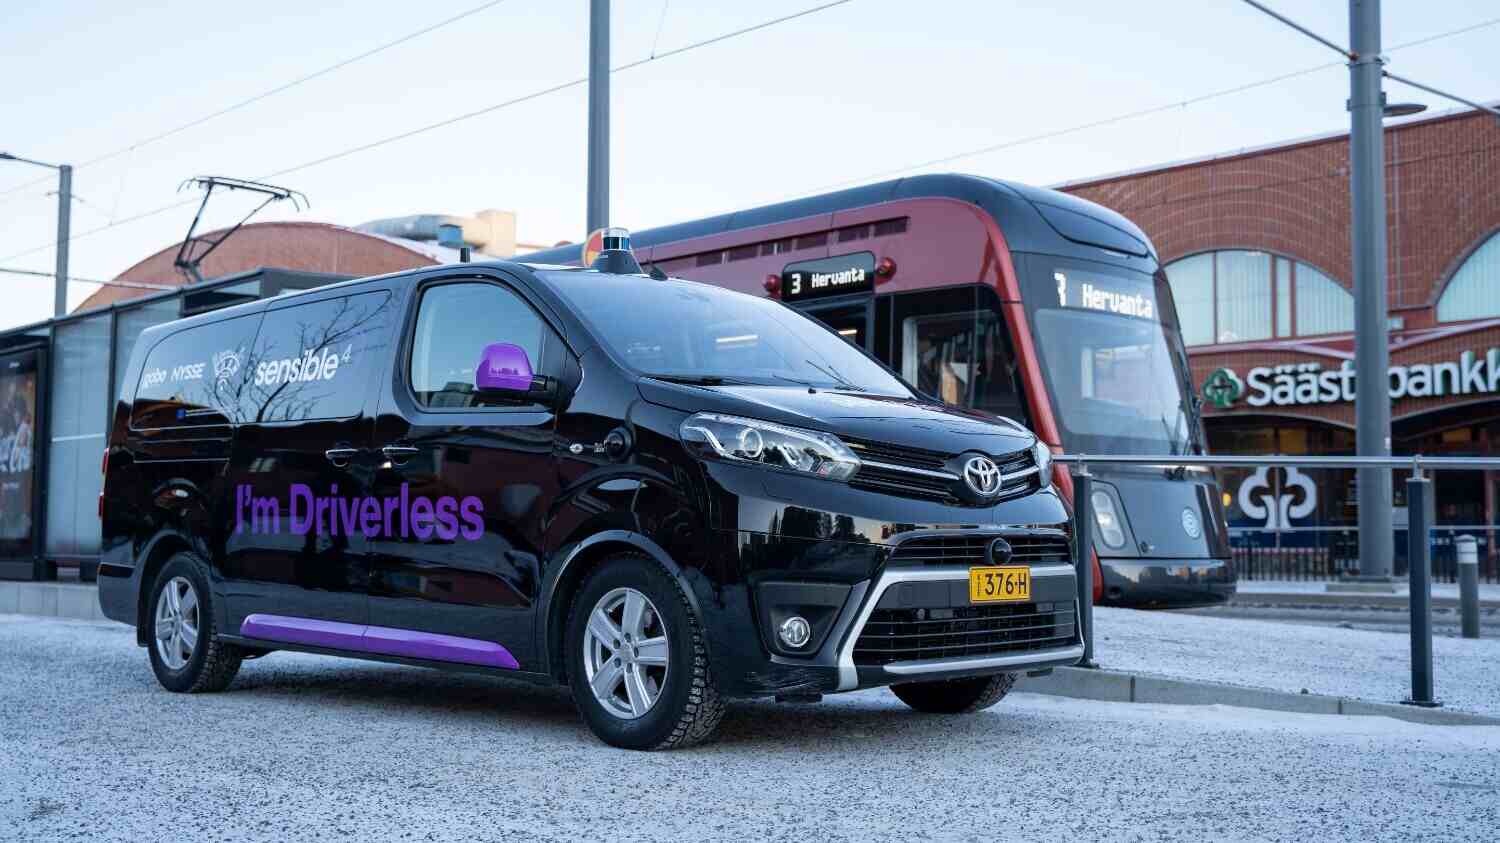 Autonomous Shuttle Bus Trial Started In Freezing Cold Weather